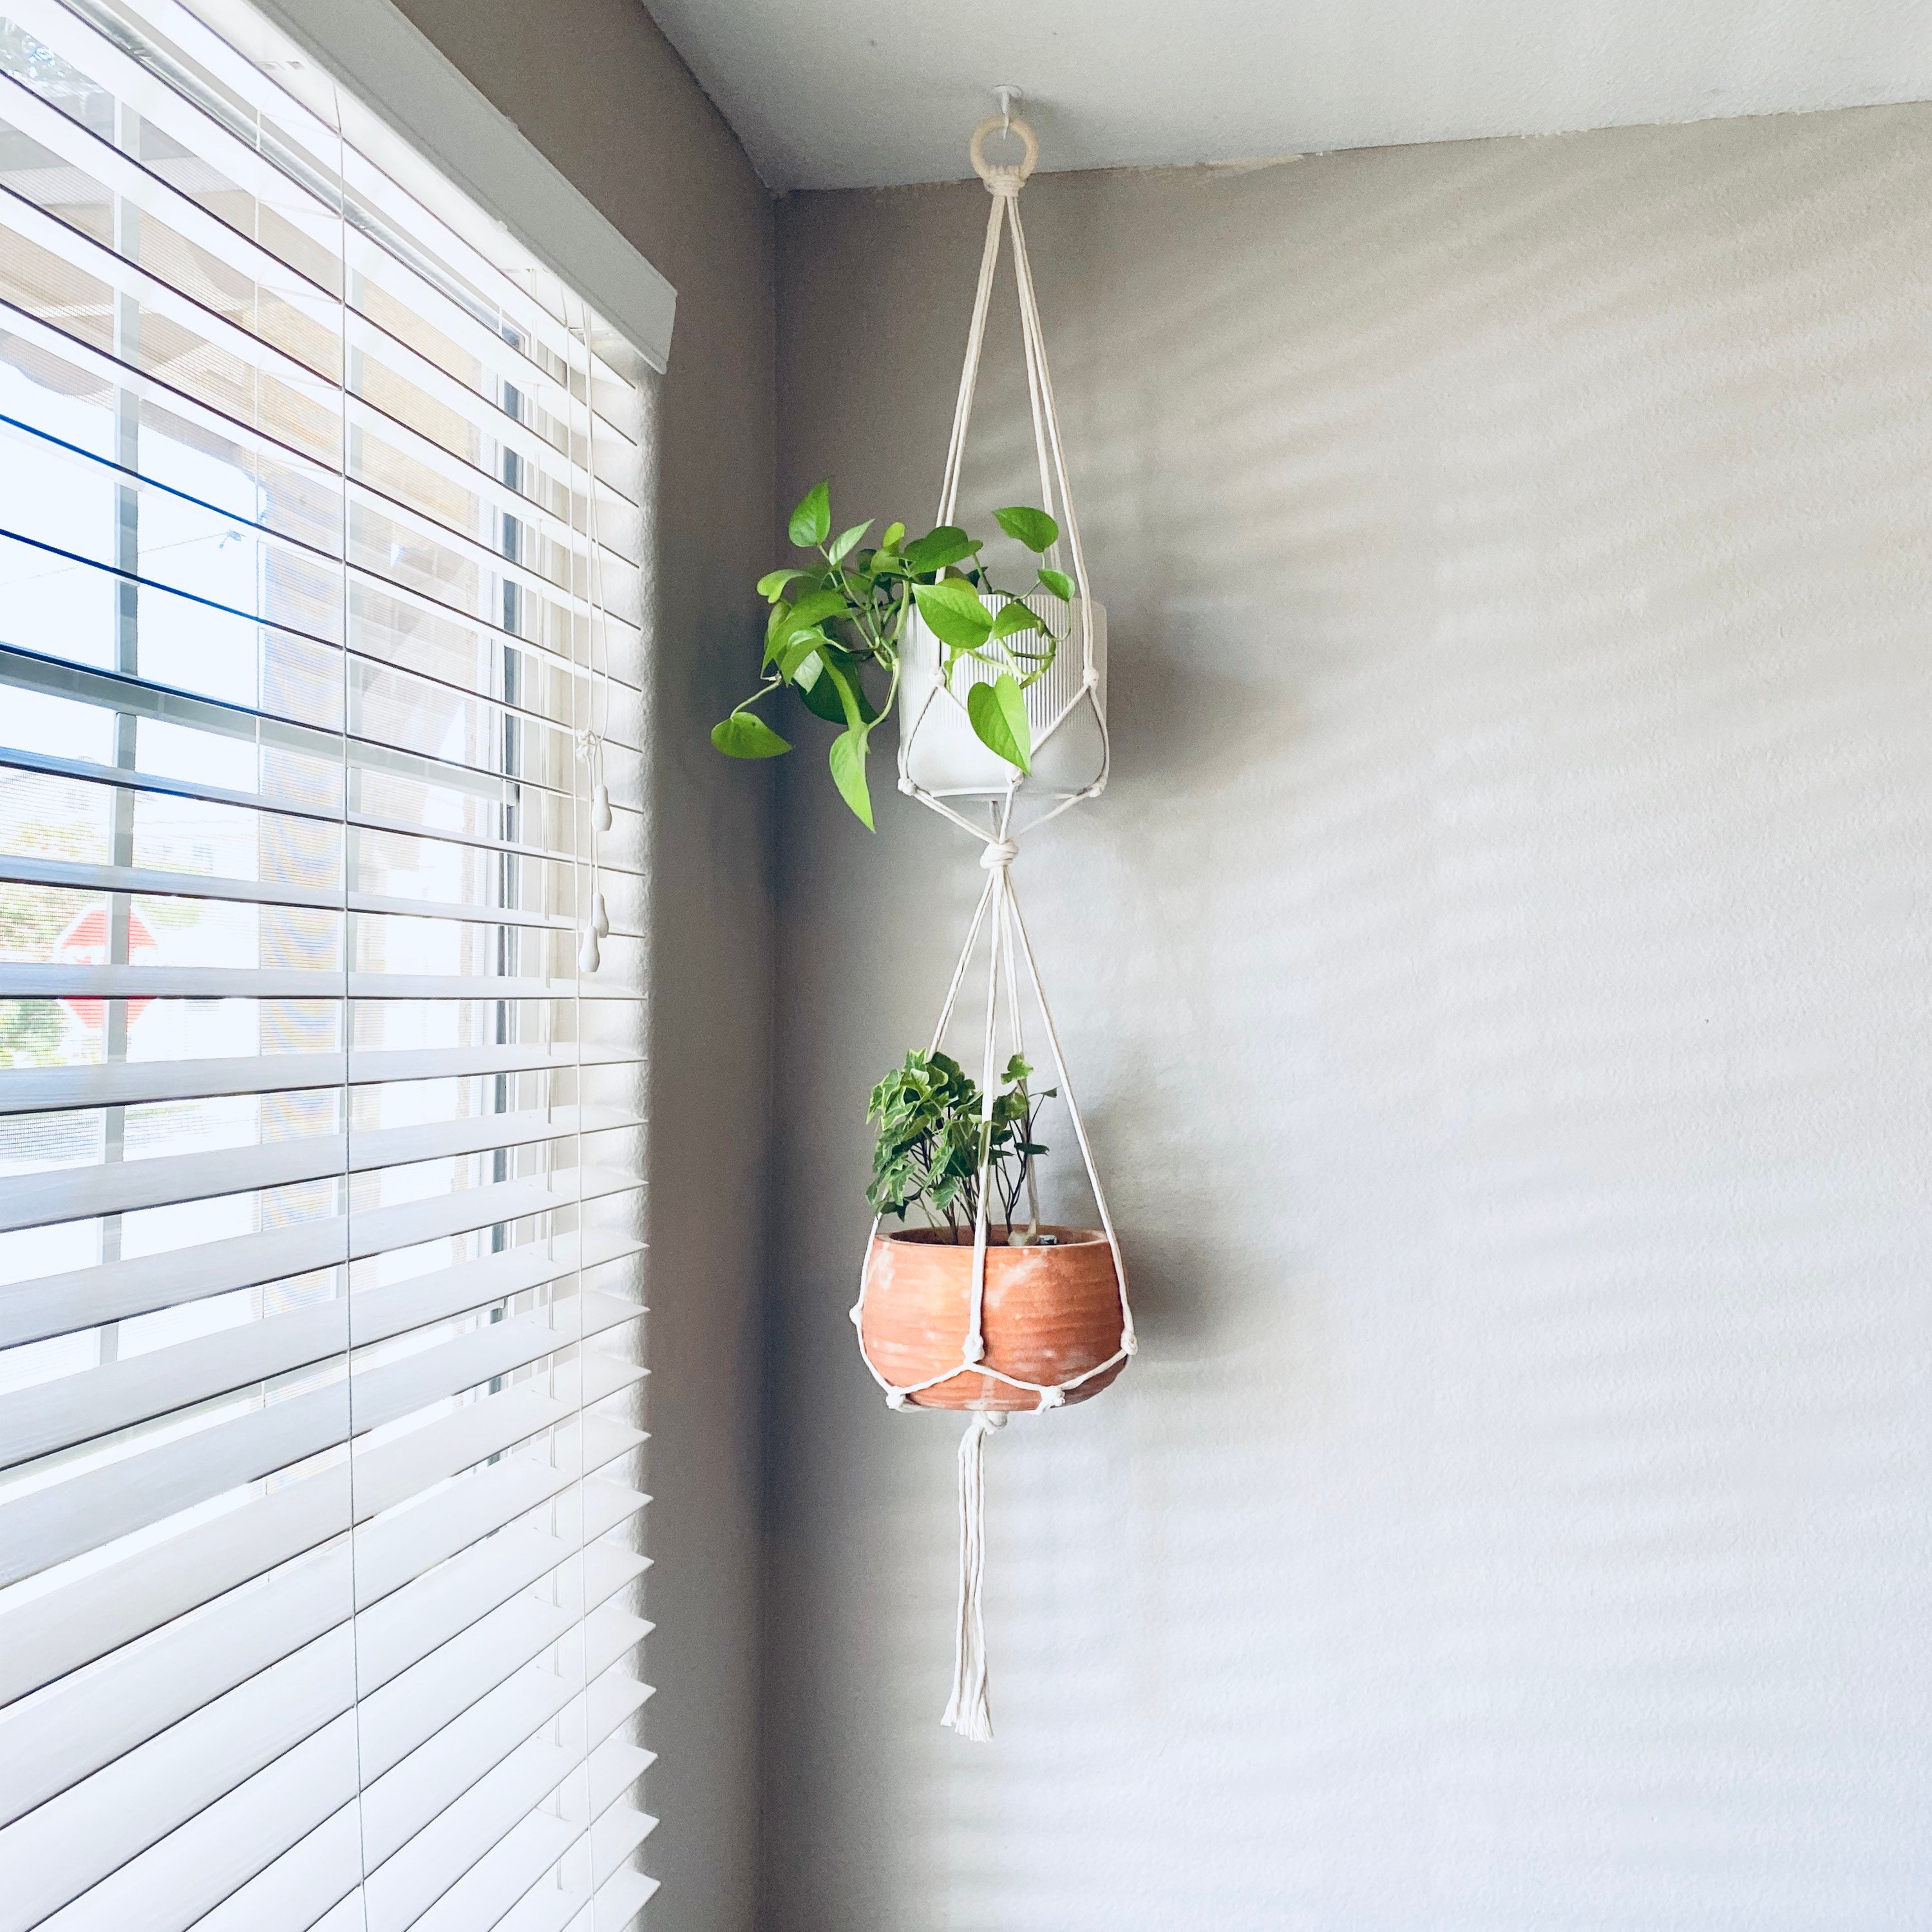 Wall Hanging Artificial Flowers LUDA Macrame Double Plant Hanger 2 Tier  Hanging Planter &Amp; Artificial Ivy Garland Fake Vine Plants From  Caocaofang, $16.13